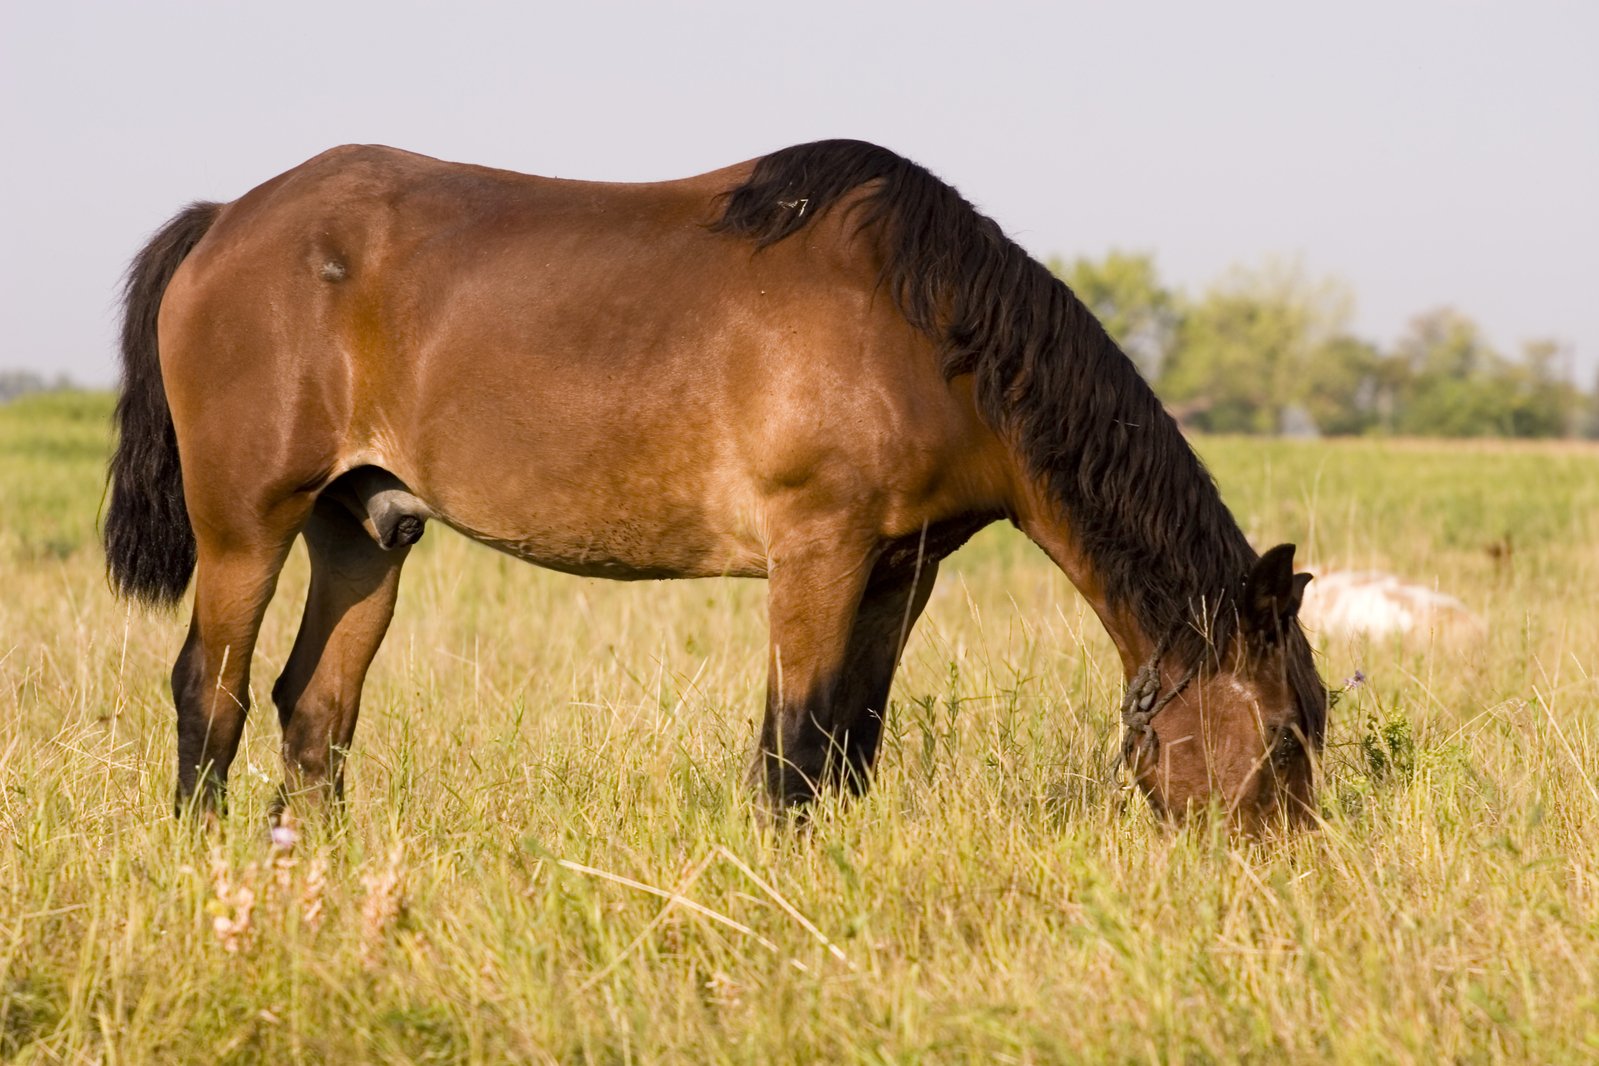 a horse eating grass in a field,